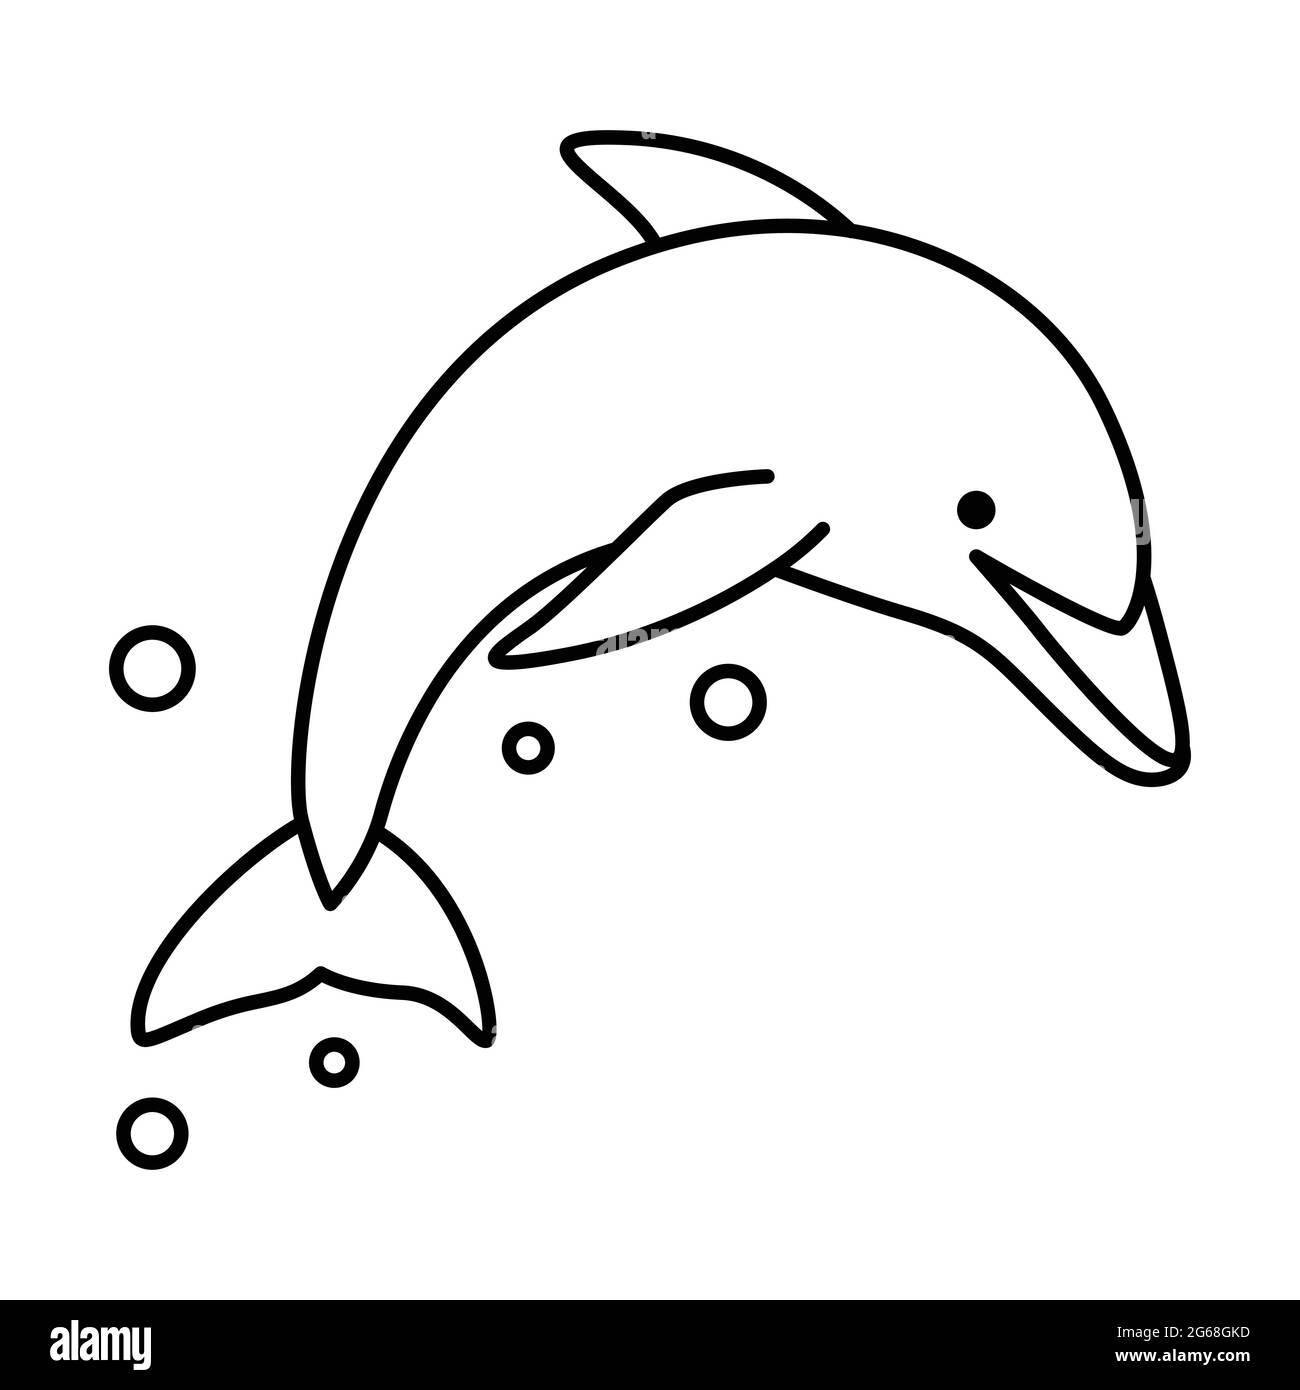 How To Draw A Dolphin: 10 Amazing and Easy Tutorials!